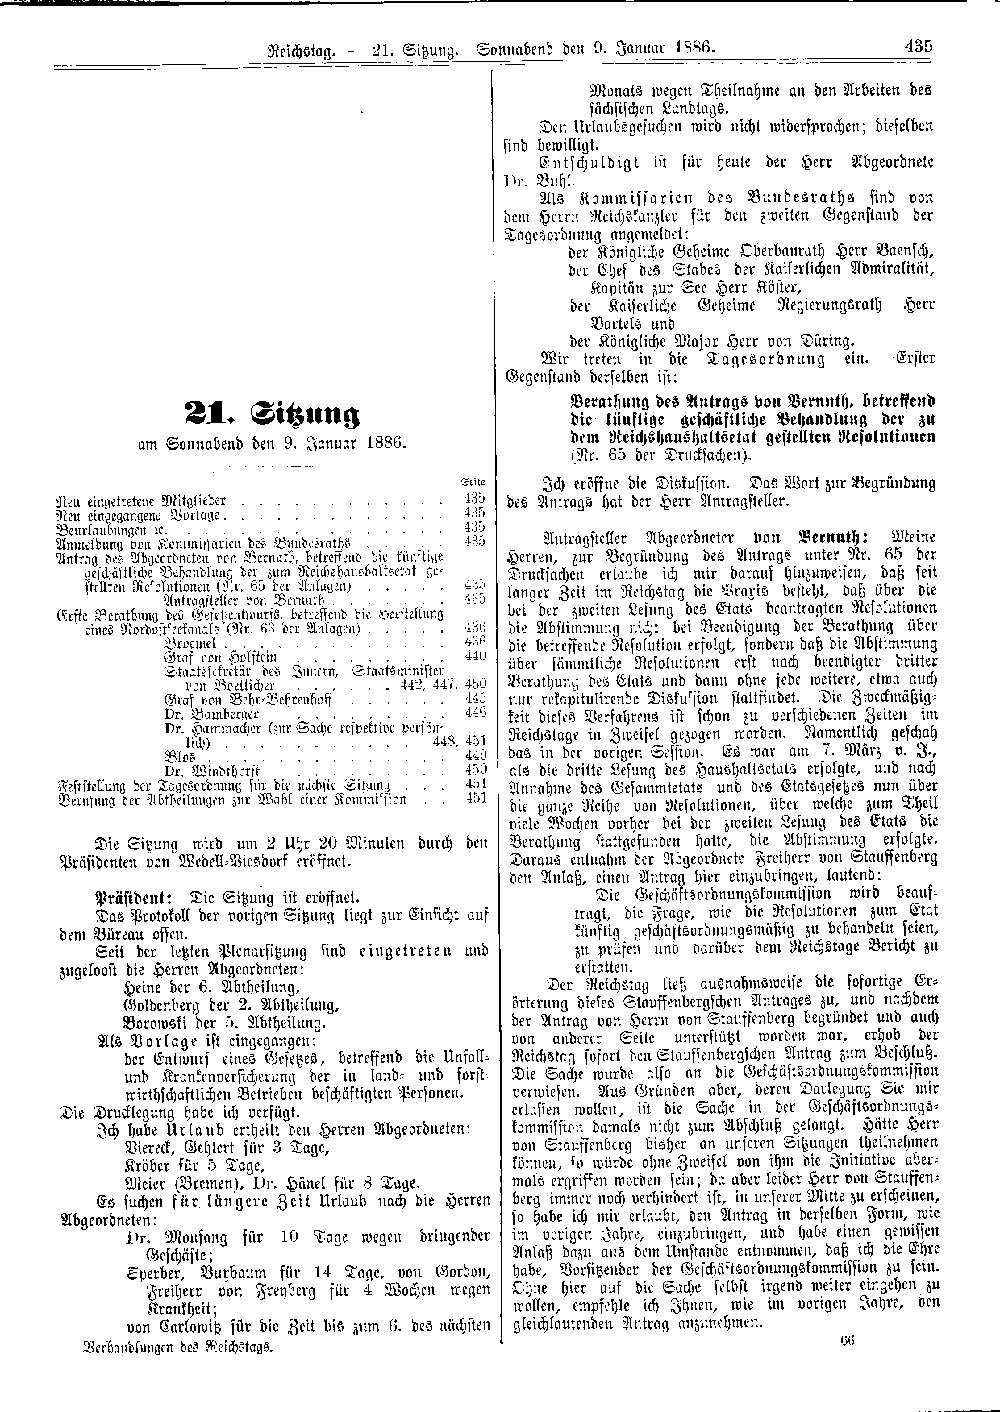 Scan of page 435